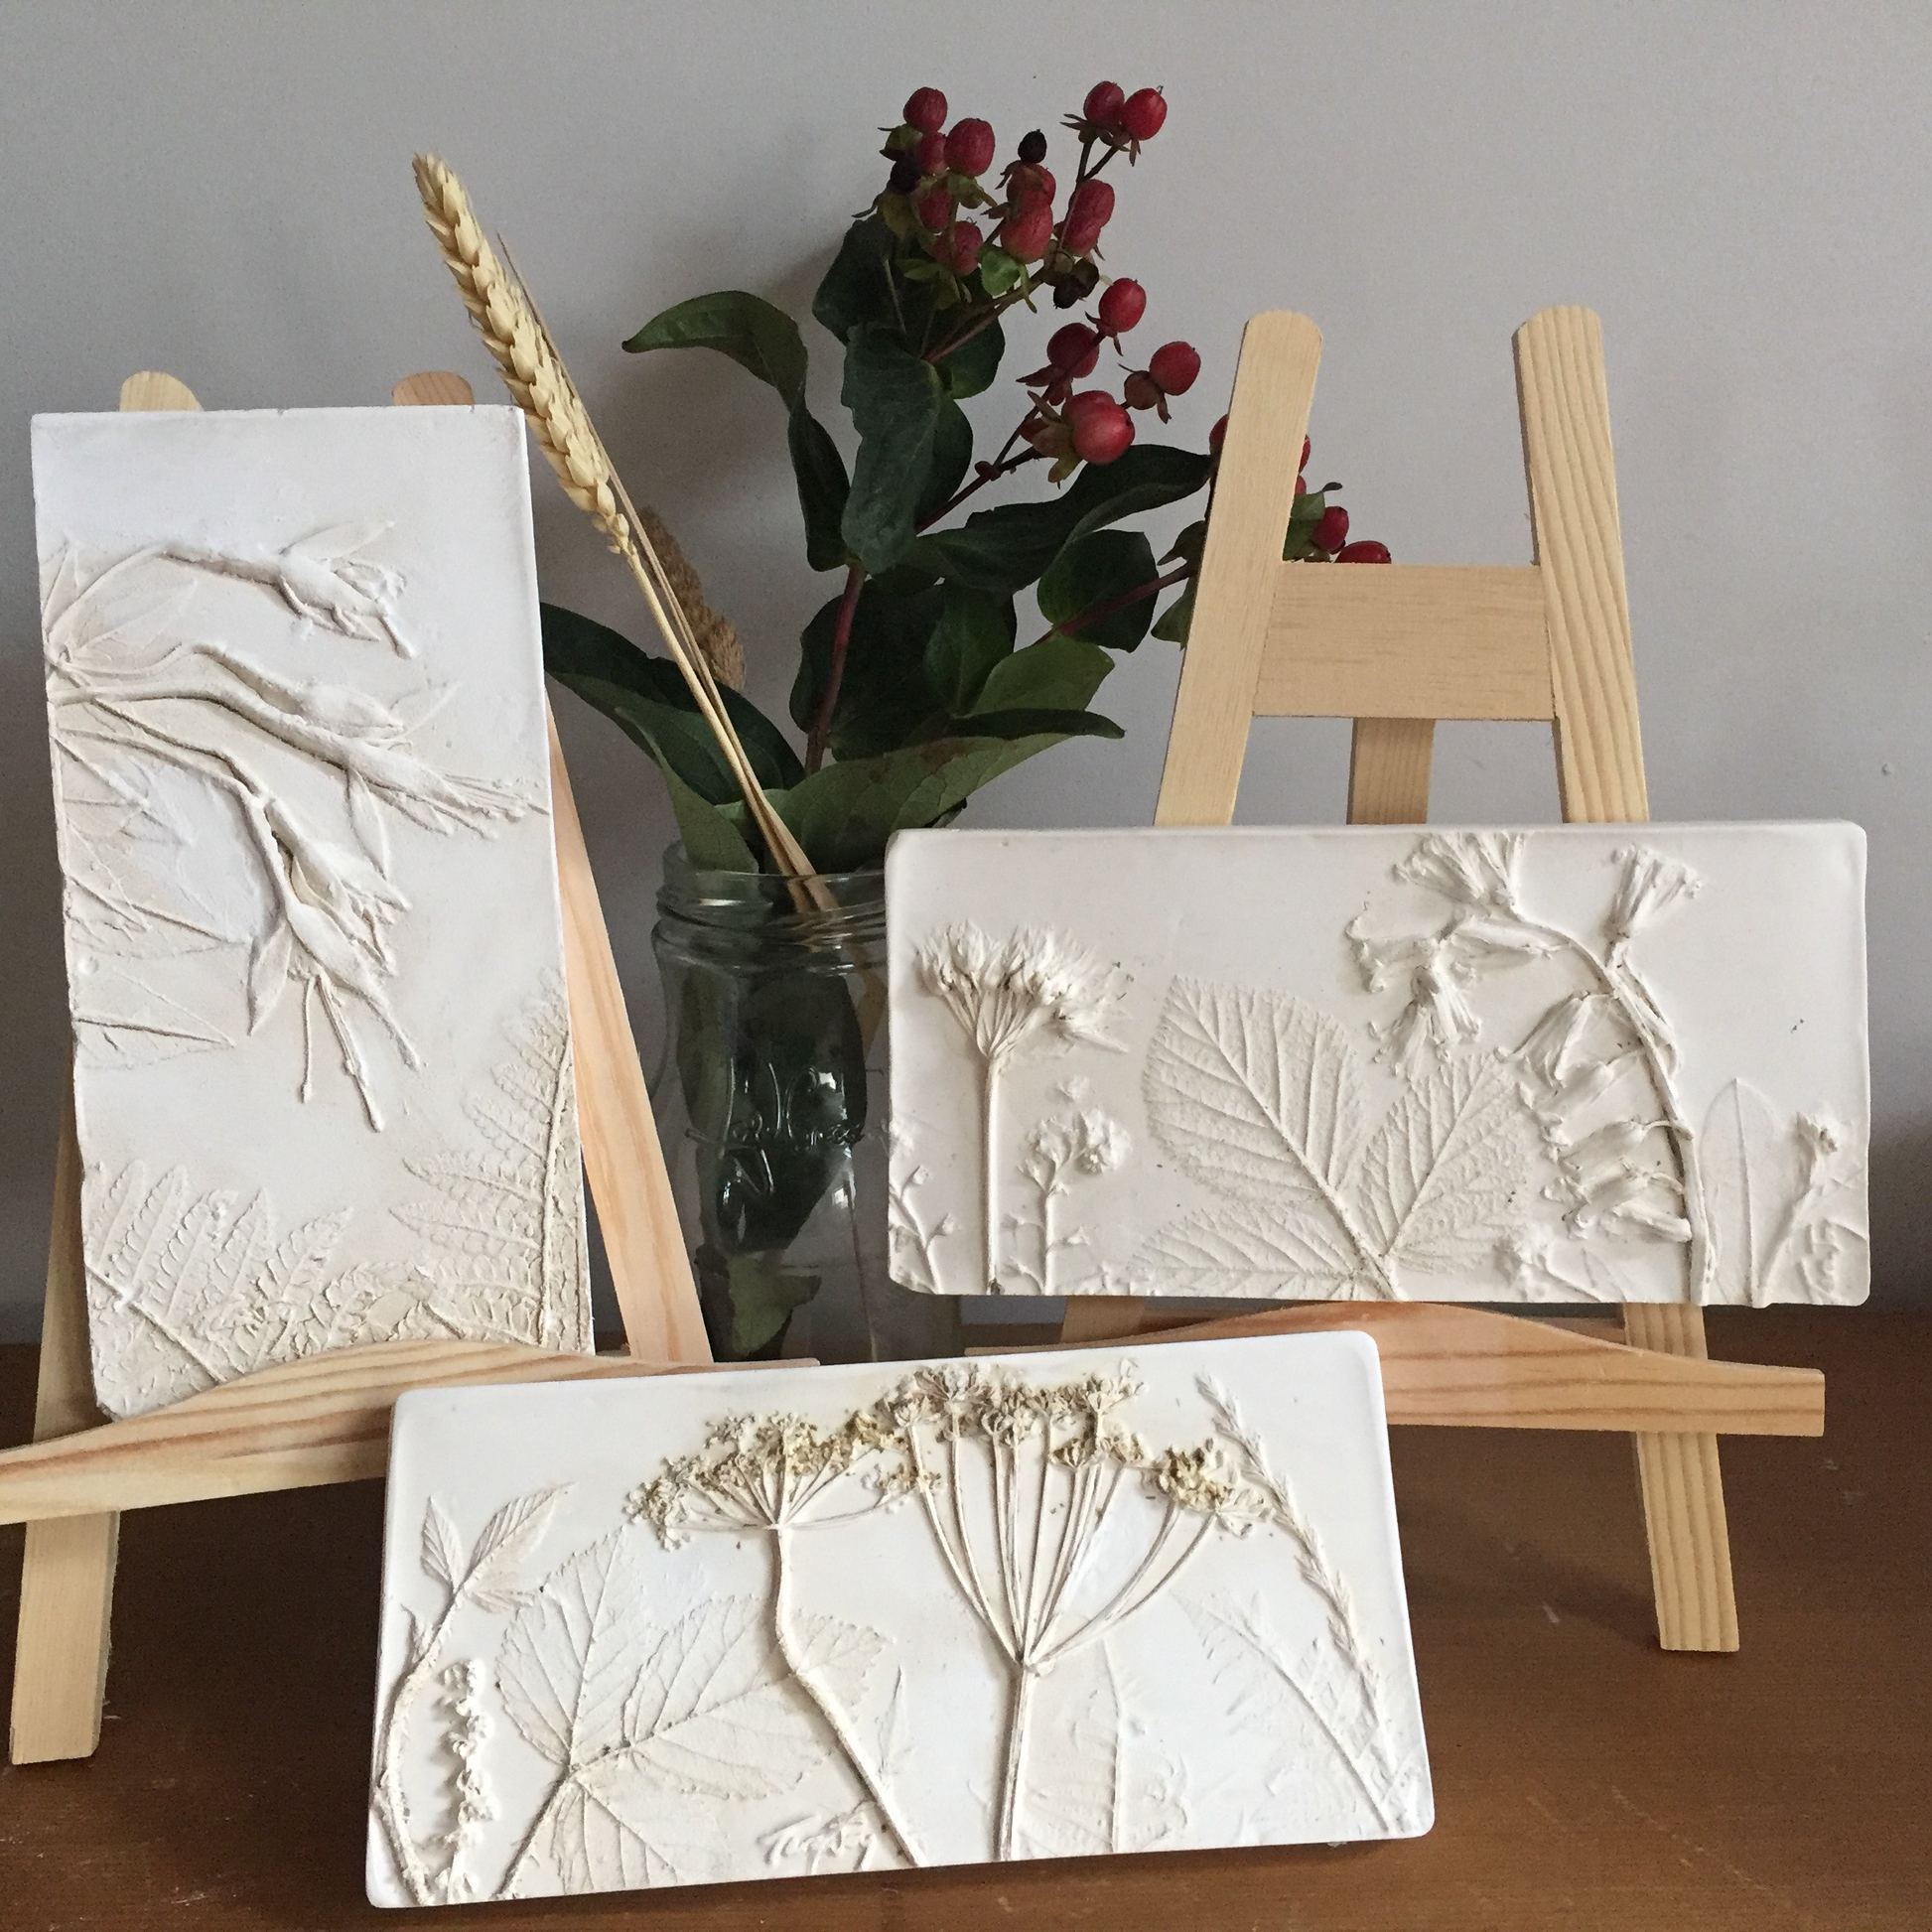 Flower Plaster Tile Casting with Ceramic Xmas Decorations - Date: 2nd November 2pm-5pm - Joy Impressions